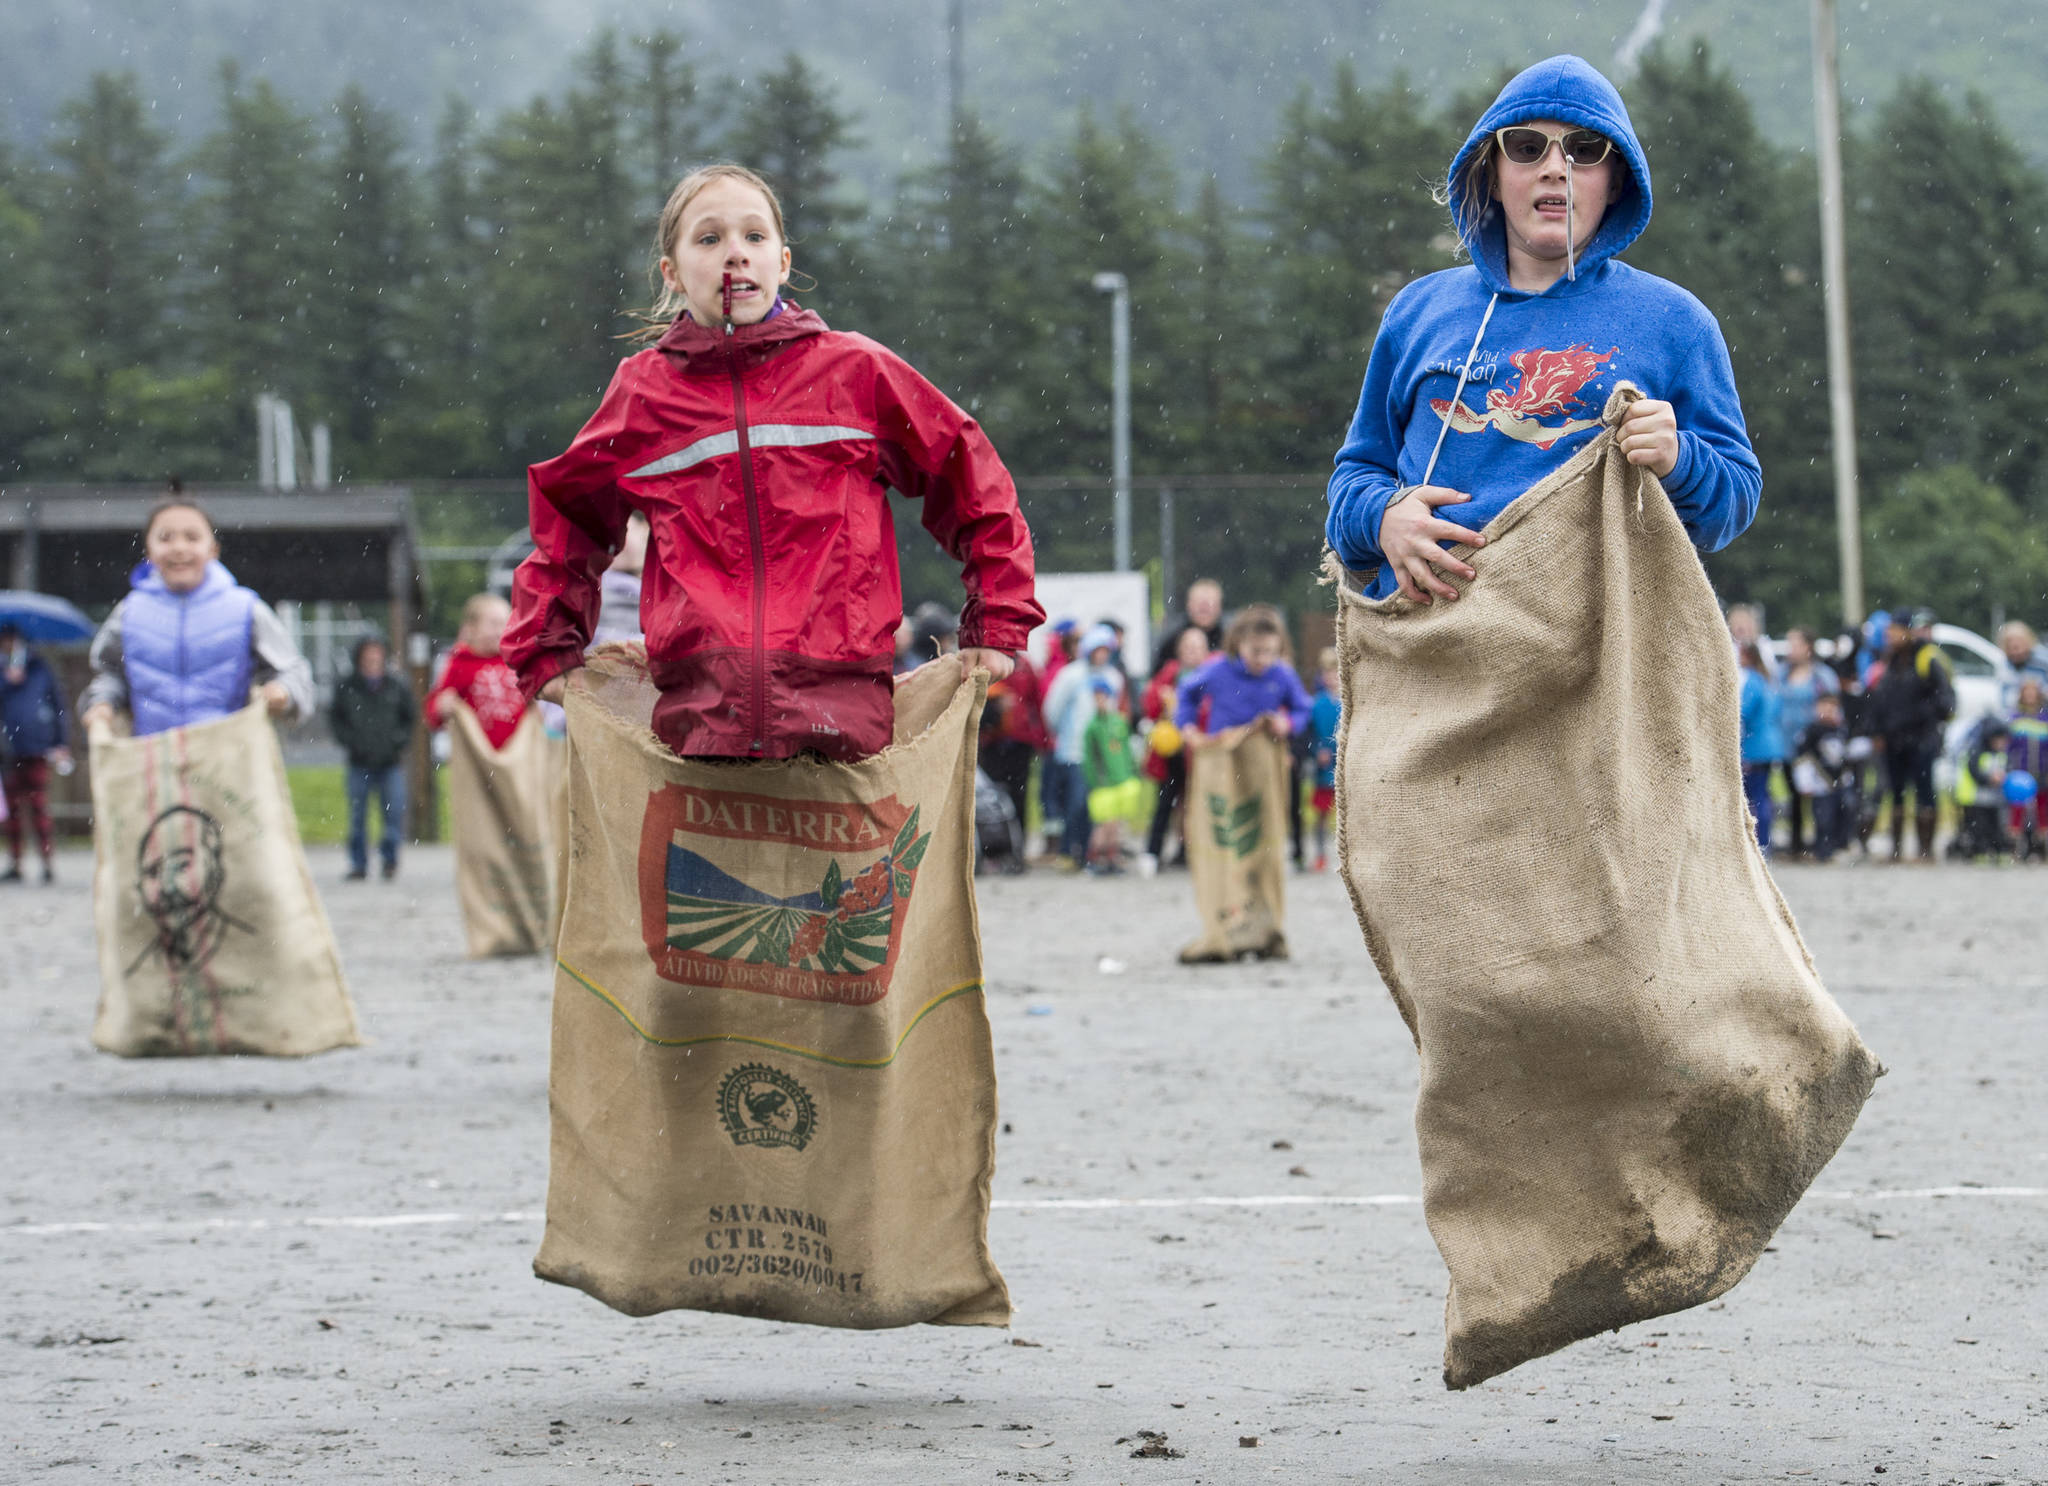 Molly McCauley, 10, right, beats Harper Wilkens, 10, by a leap in the gunny sack race during the 4th of July activities in Douglas on Tuesday, July 4, 2017. (Michael Penn | Juneau Empire)